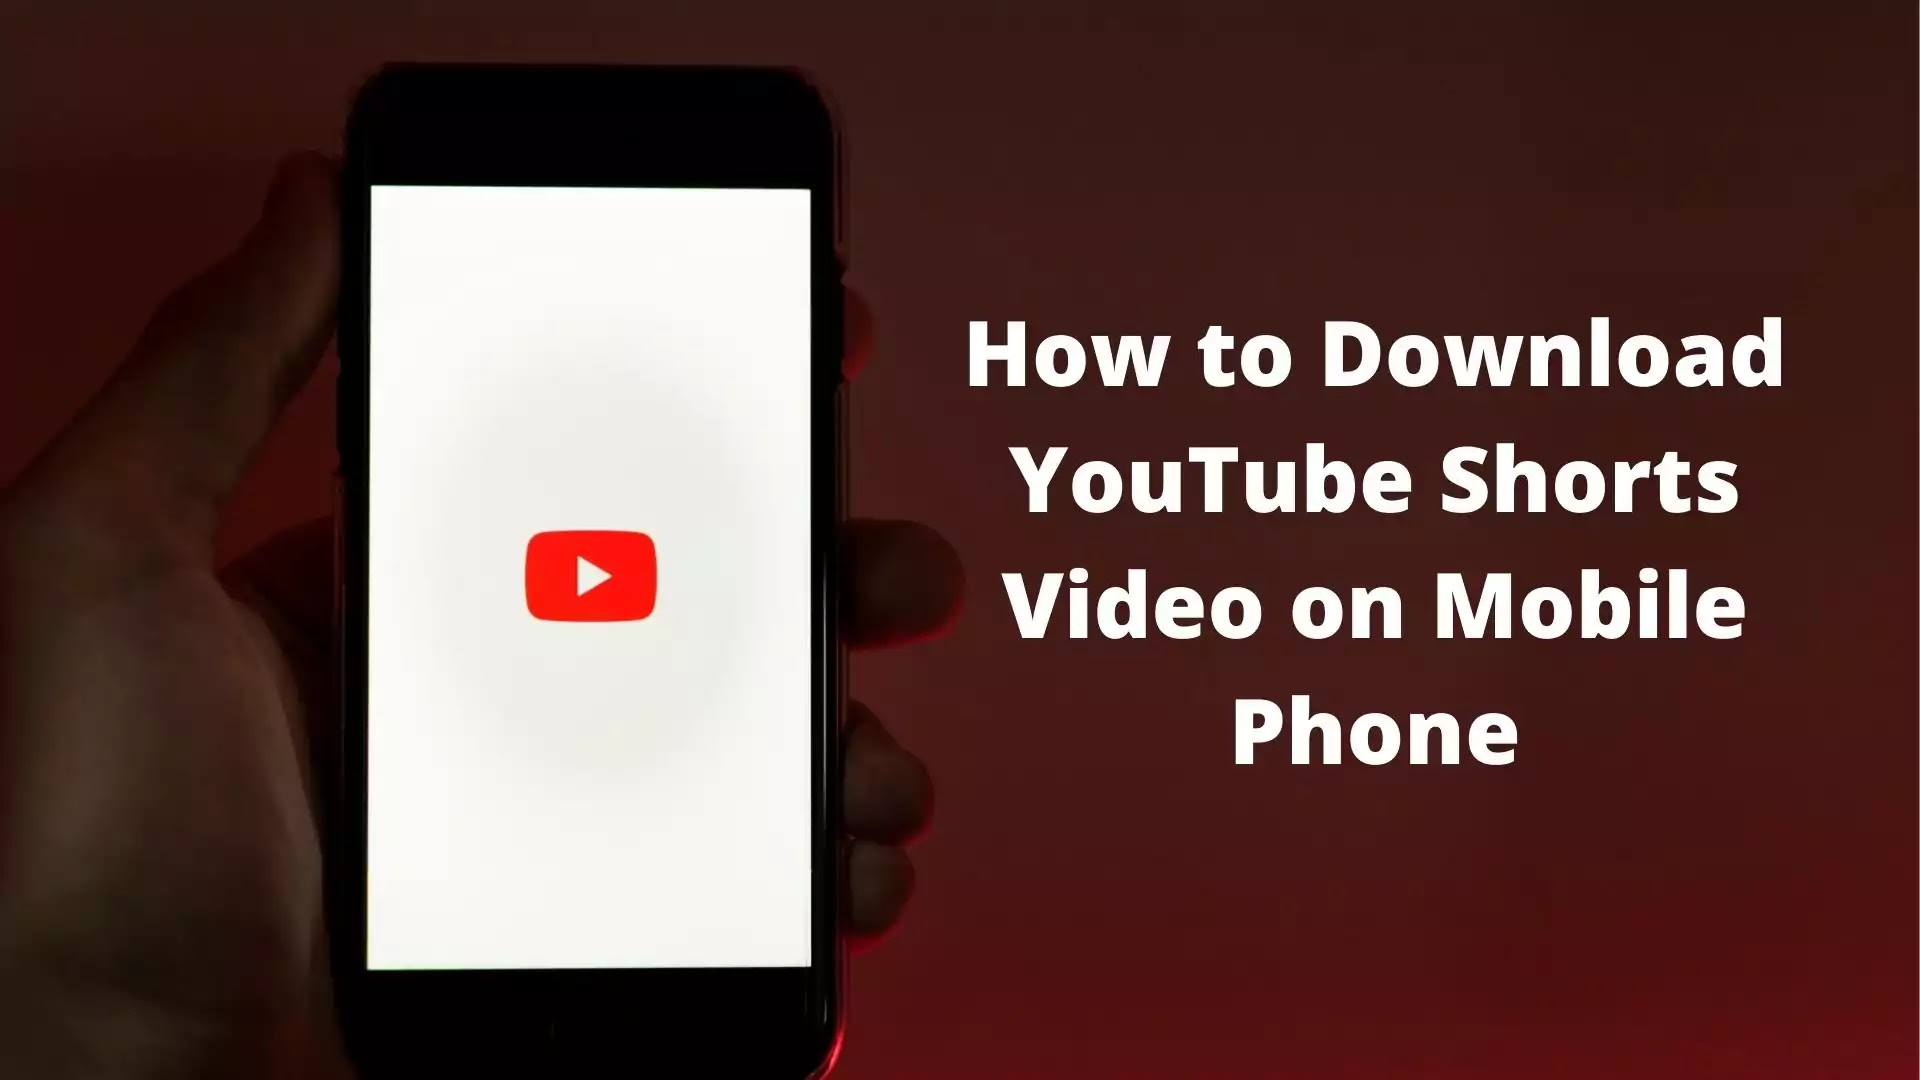 How to Download YouTube Shorts Video on Mobile Phone